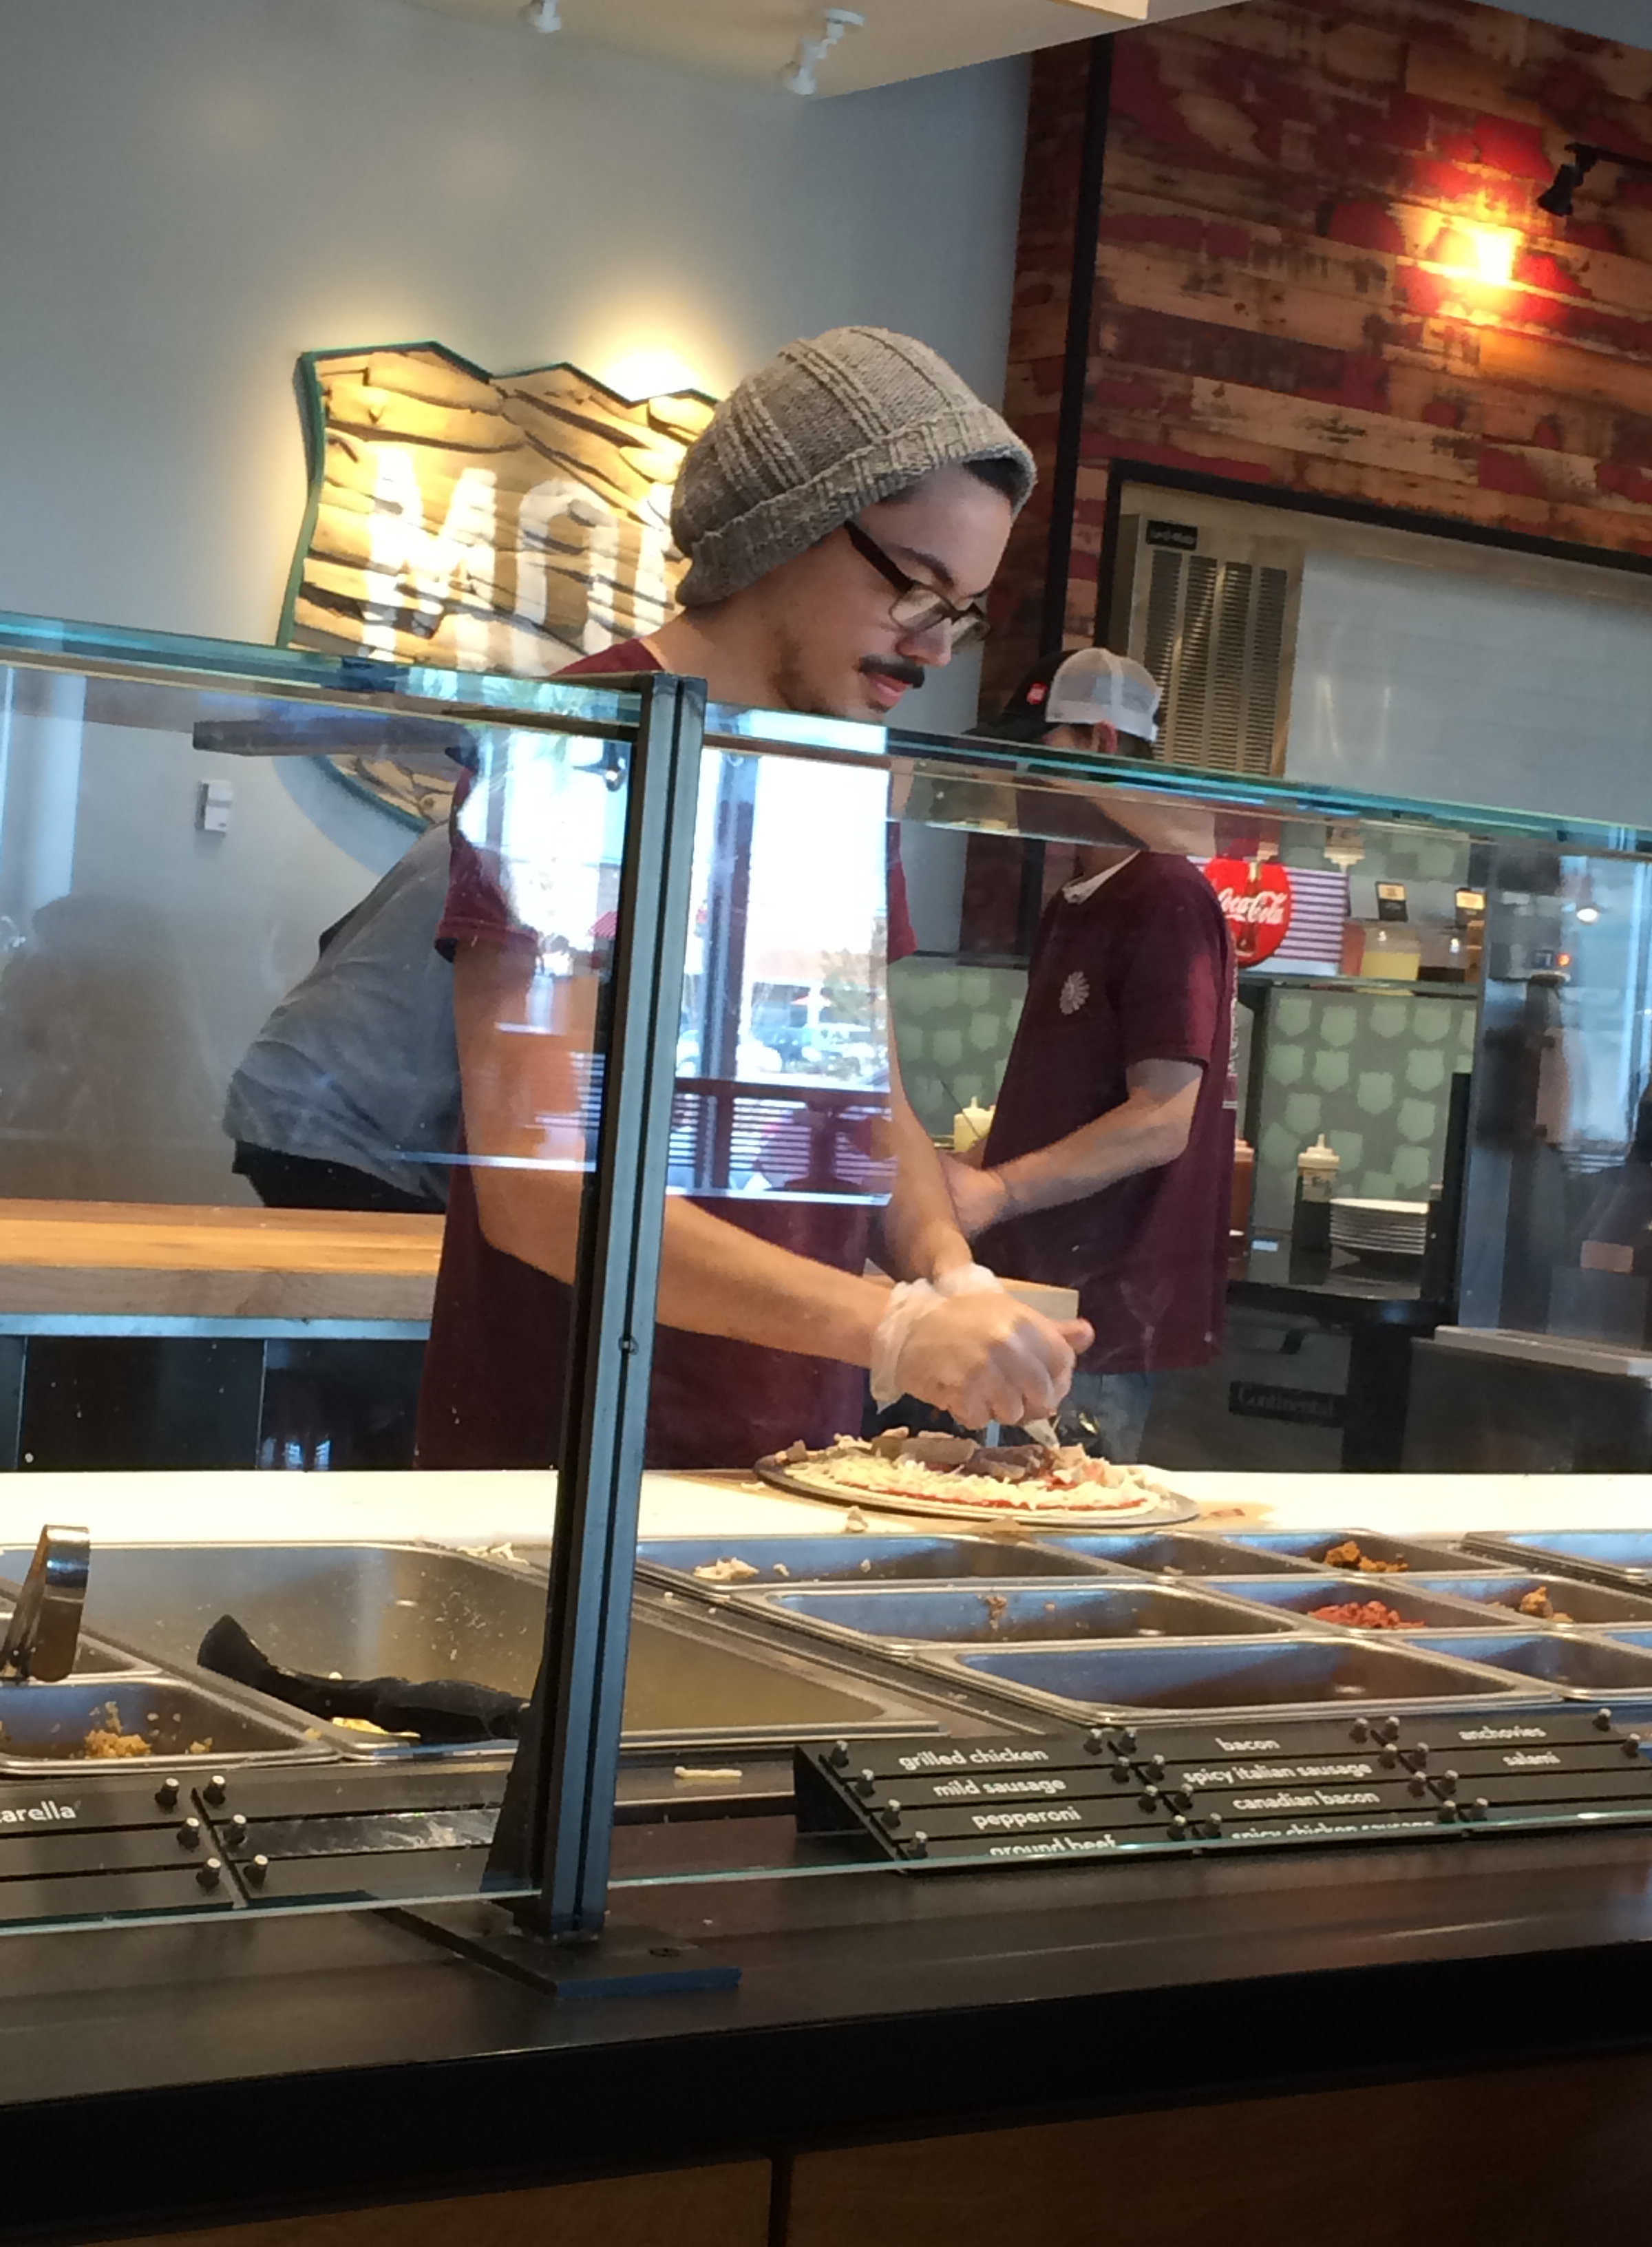 The employees at the MOD Pizza location in Myrtle Beach are hard working and friendly.